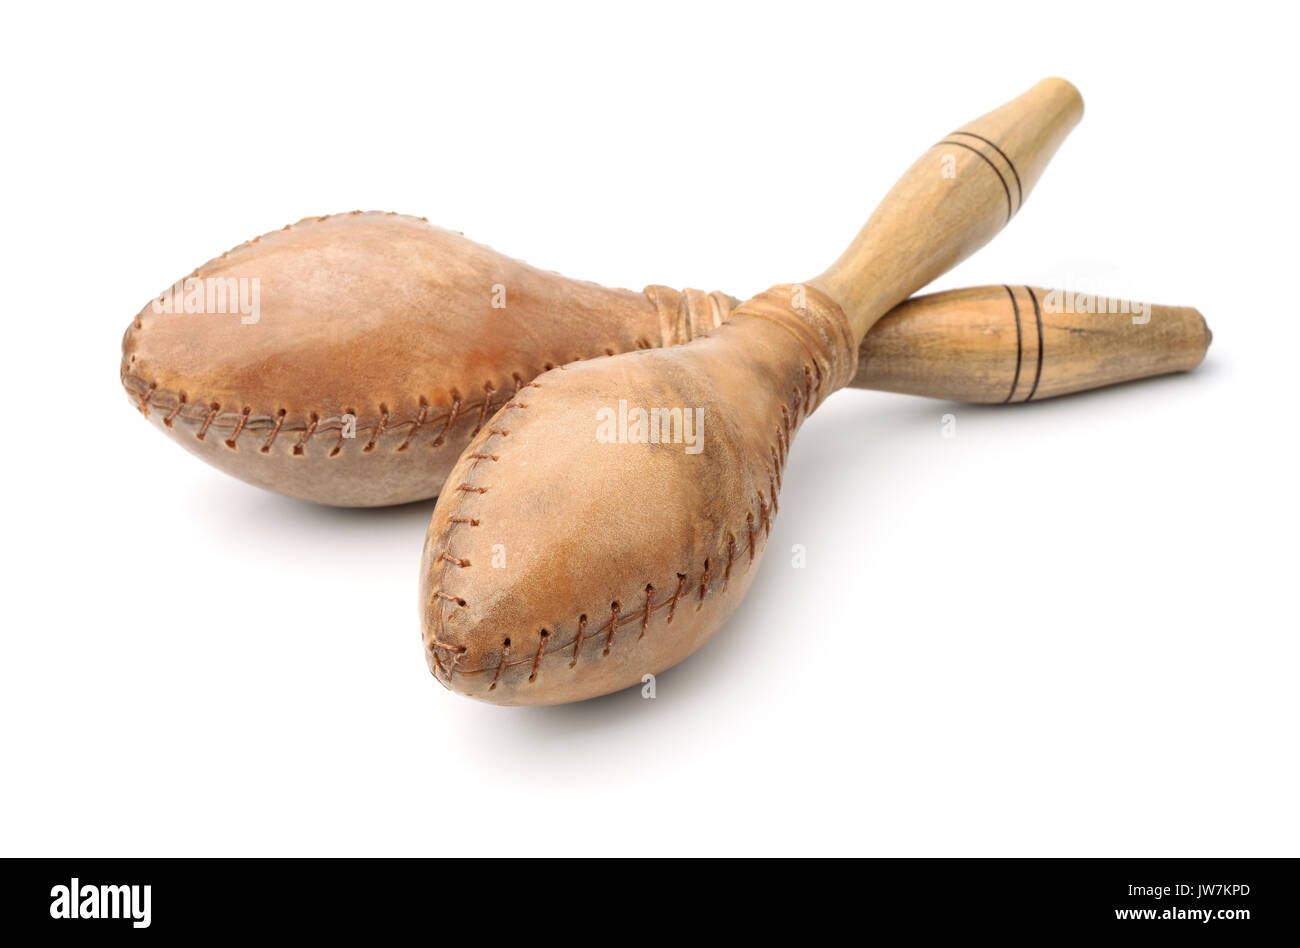 Pair  of maracas made of leather and wood isolated on white Stock Photo